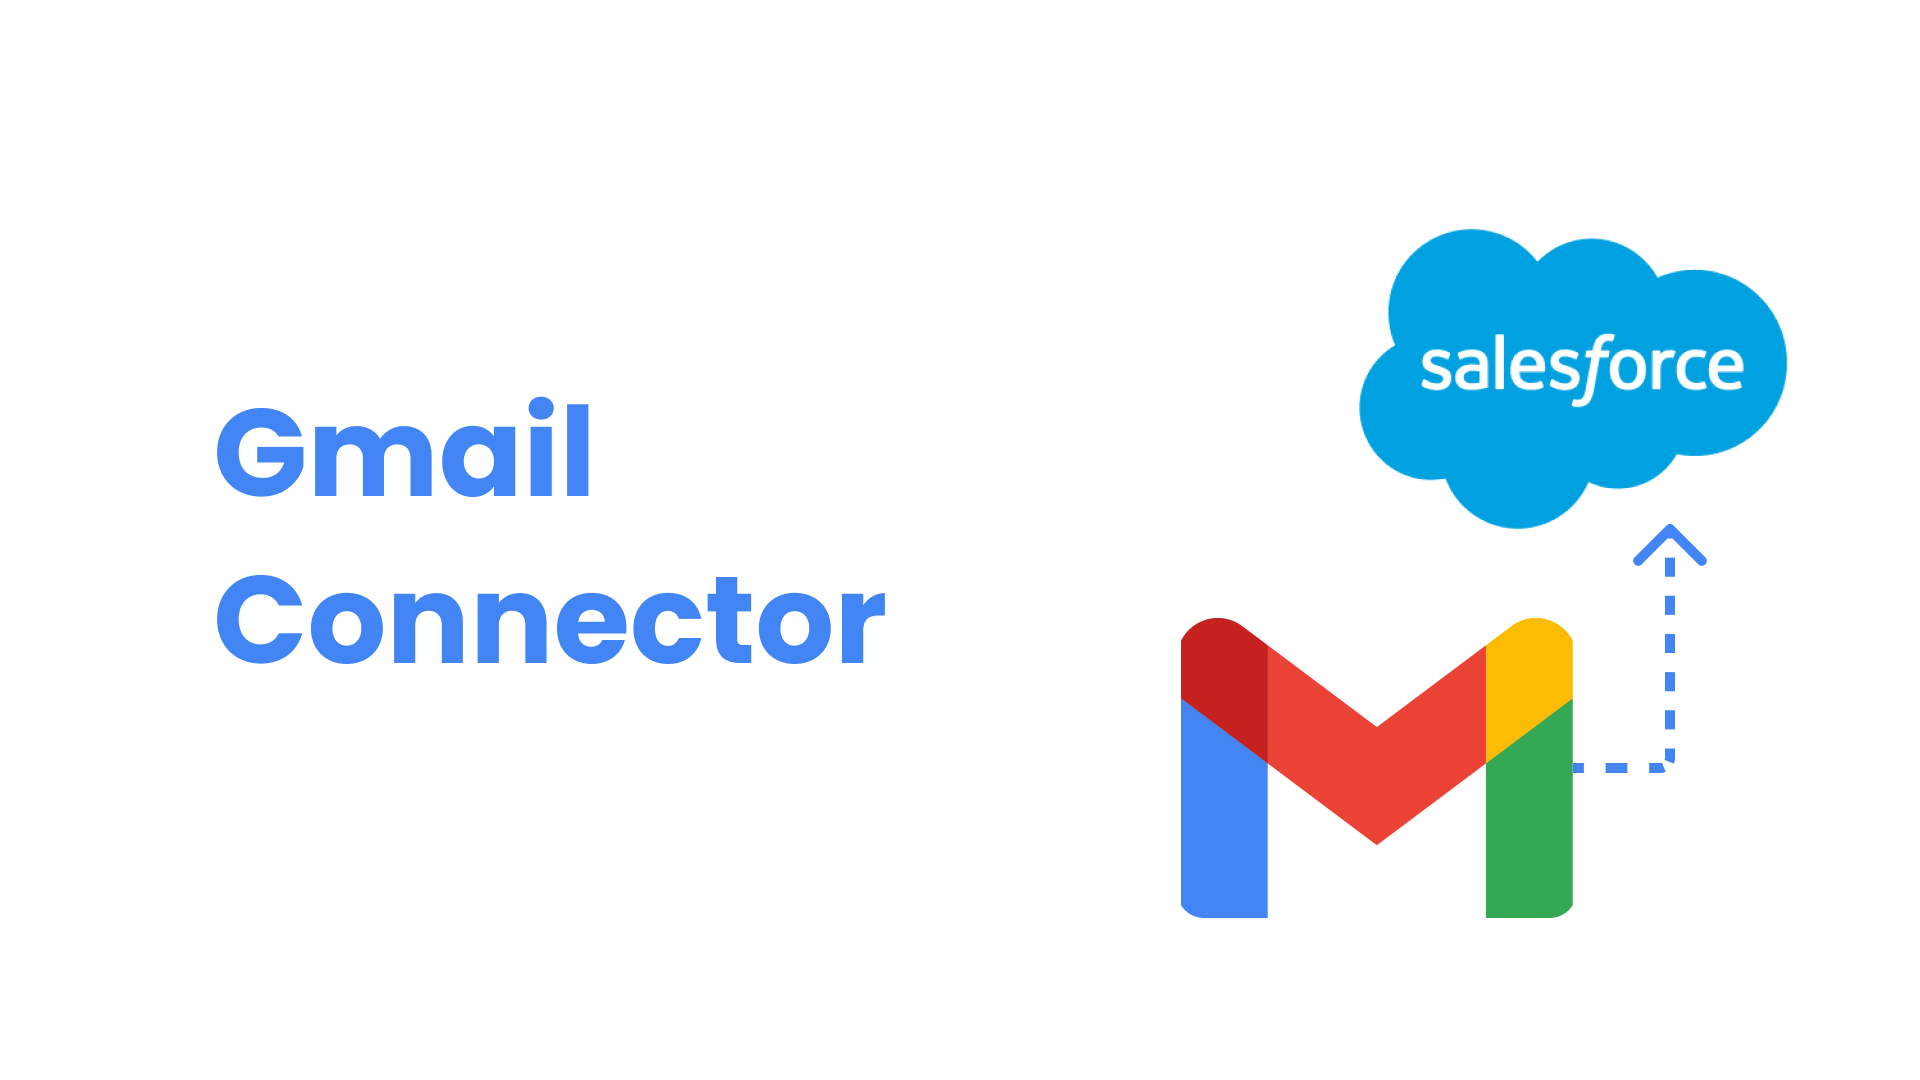 Delpha can connect your Gmail account to your Salesforce org